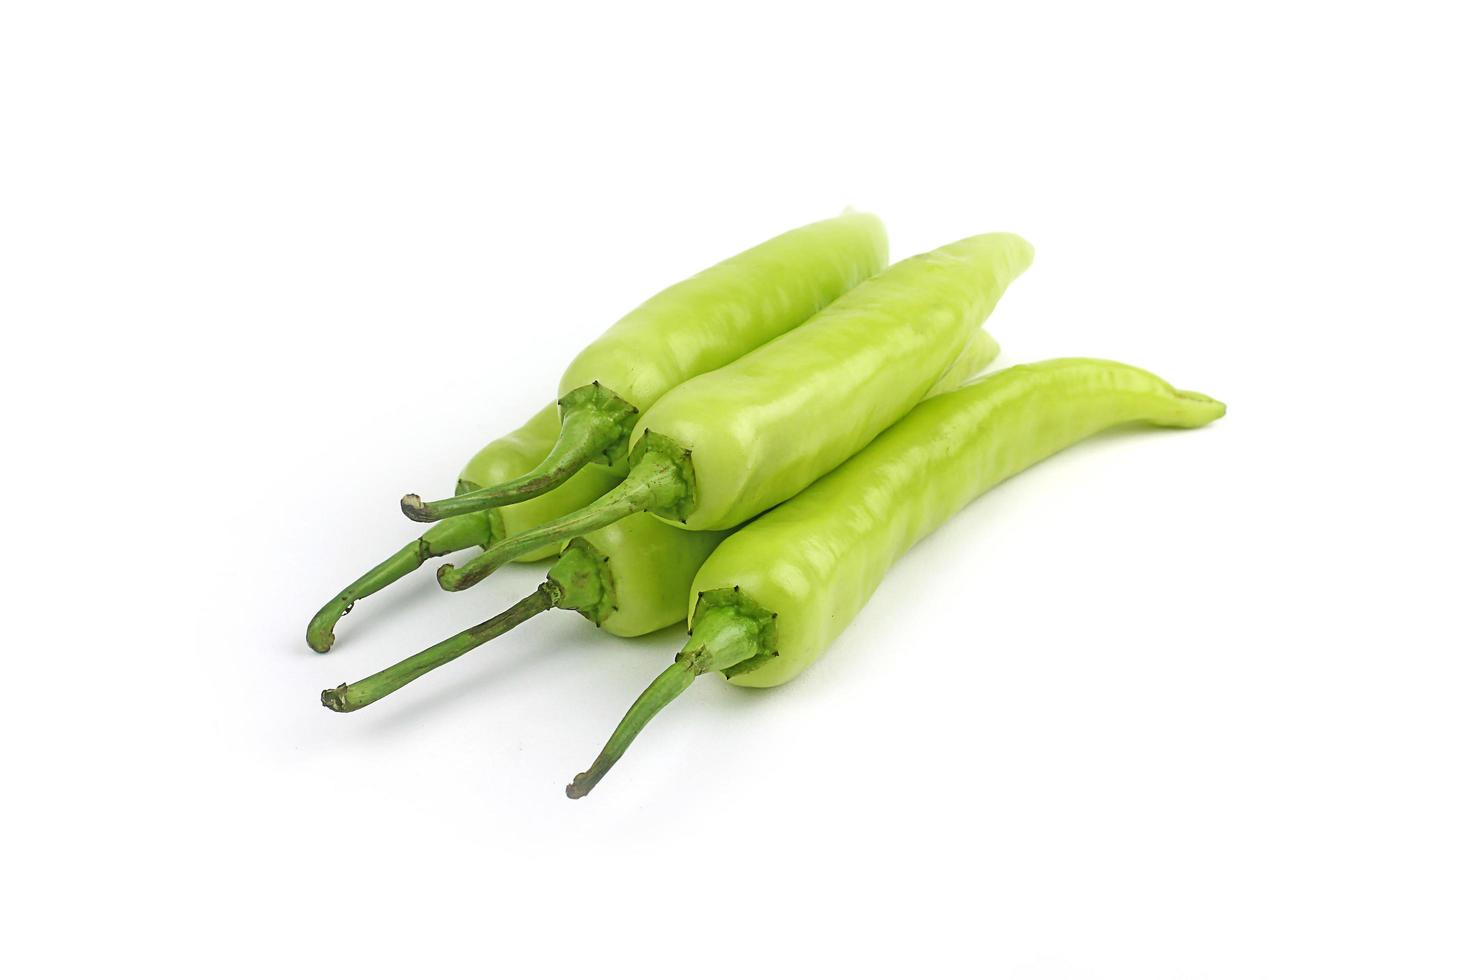 fresh green banana peppers or sweet peppers isolated on a white background photo